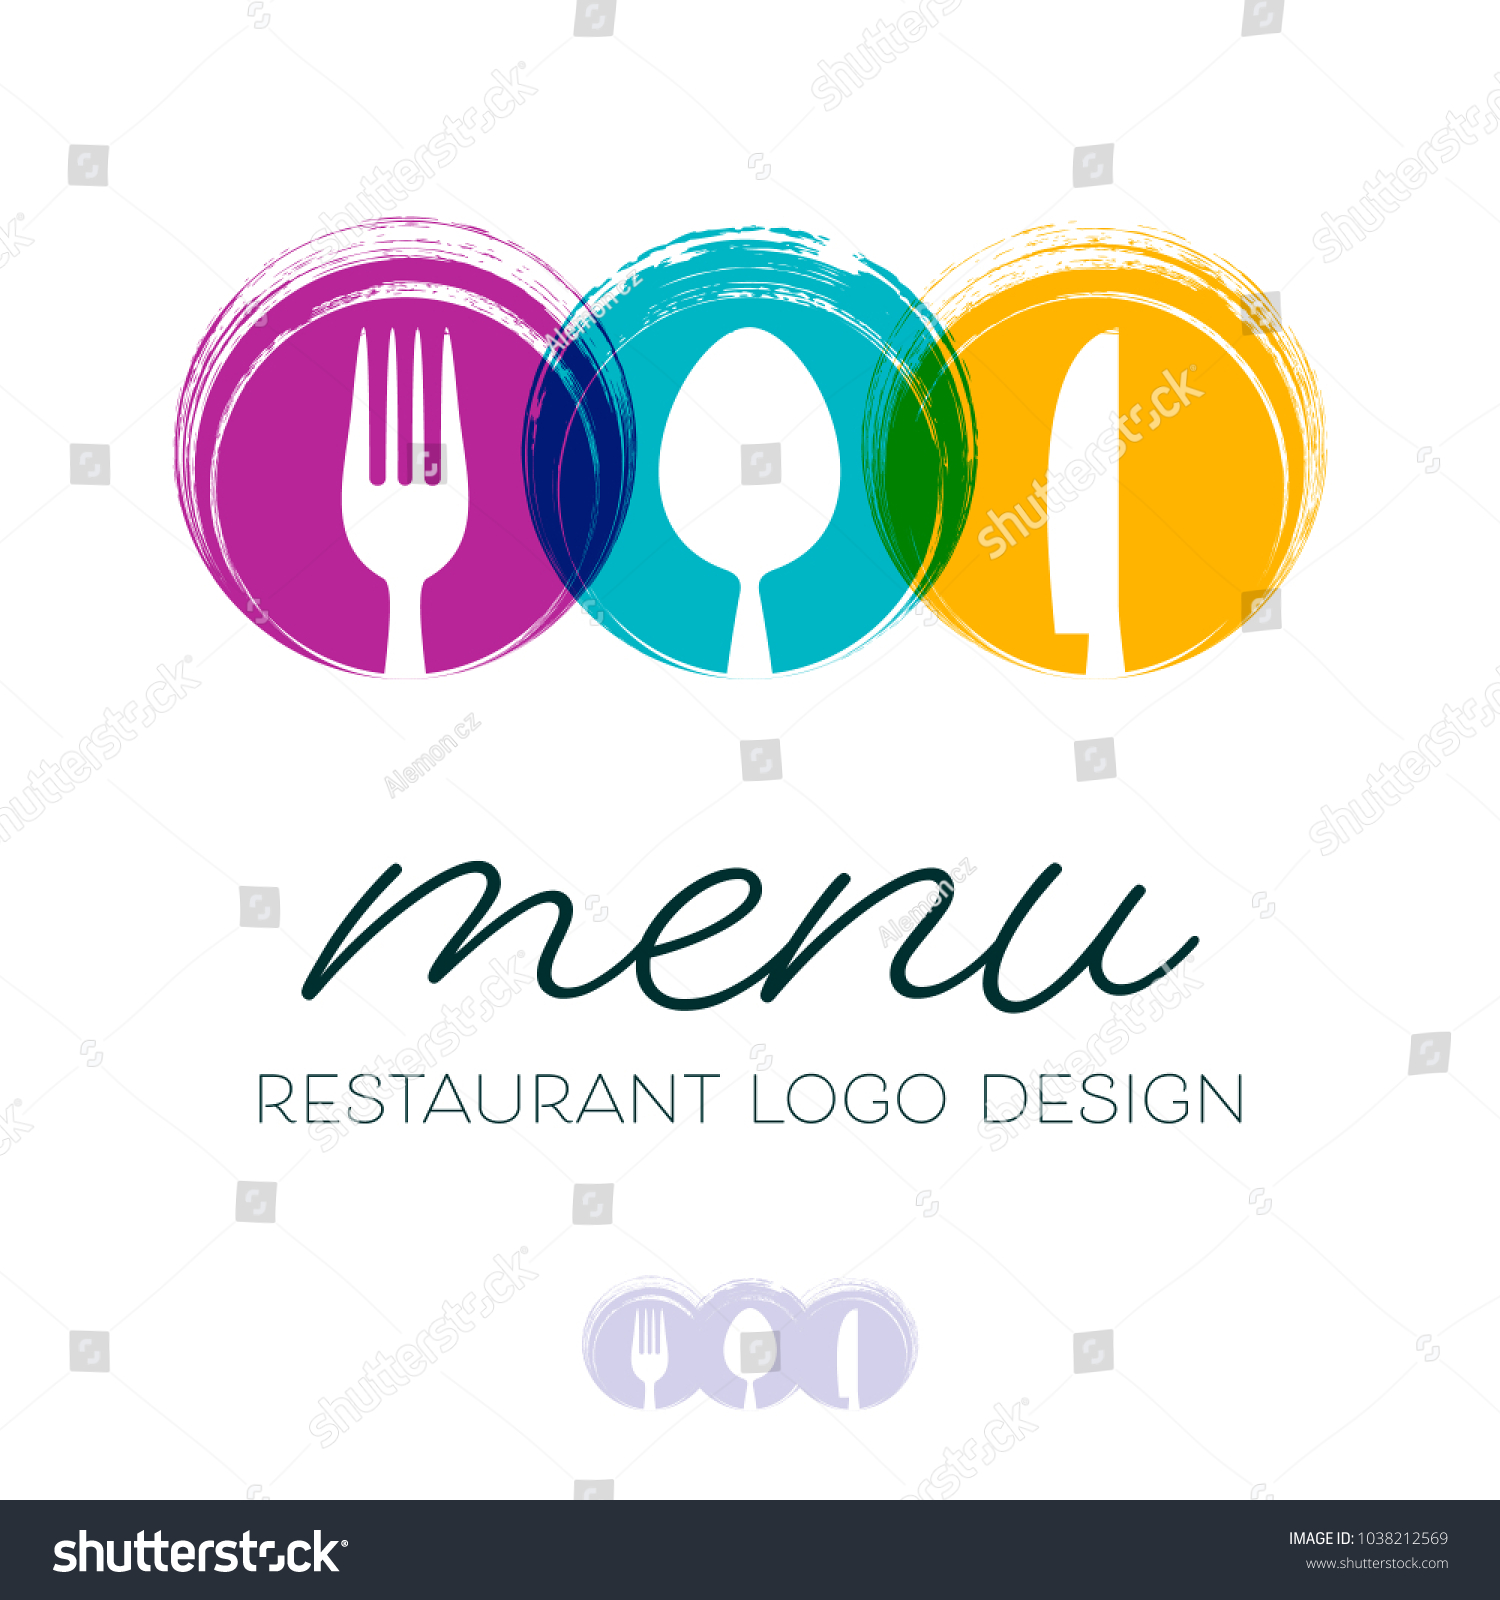 Abstract restaurant menu design with cutlery signs logo #1038212569